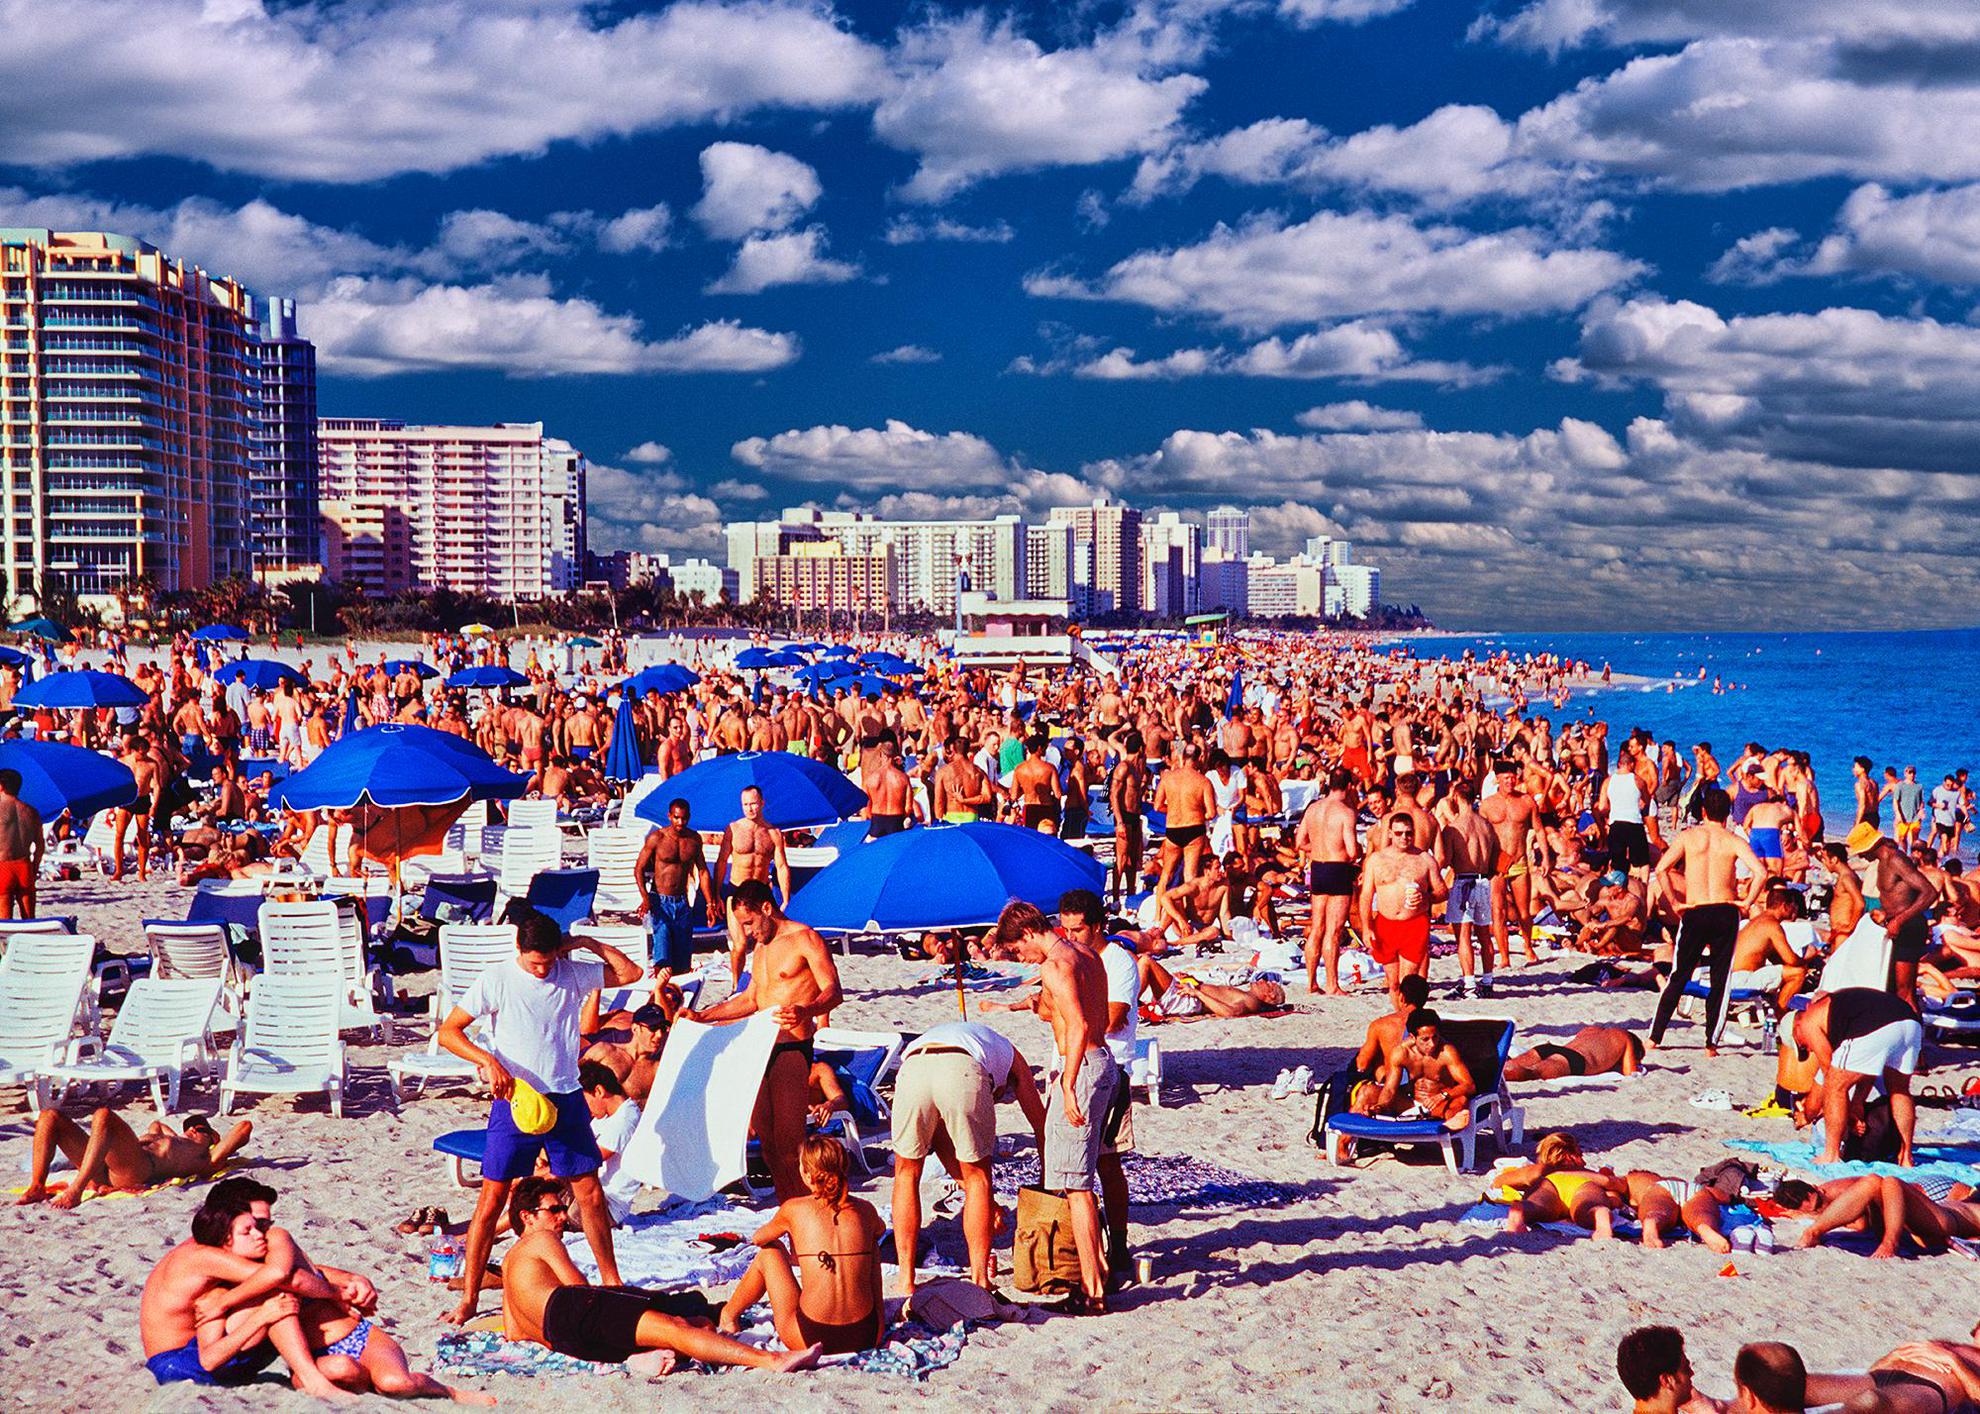 Mitchell Funk Gay Beach A Heavenly Place On Miami Beach Men In Bathing Suits Gay Interest 9236